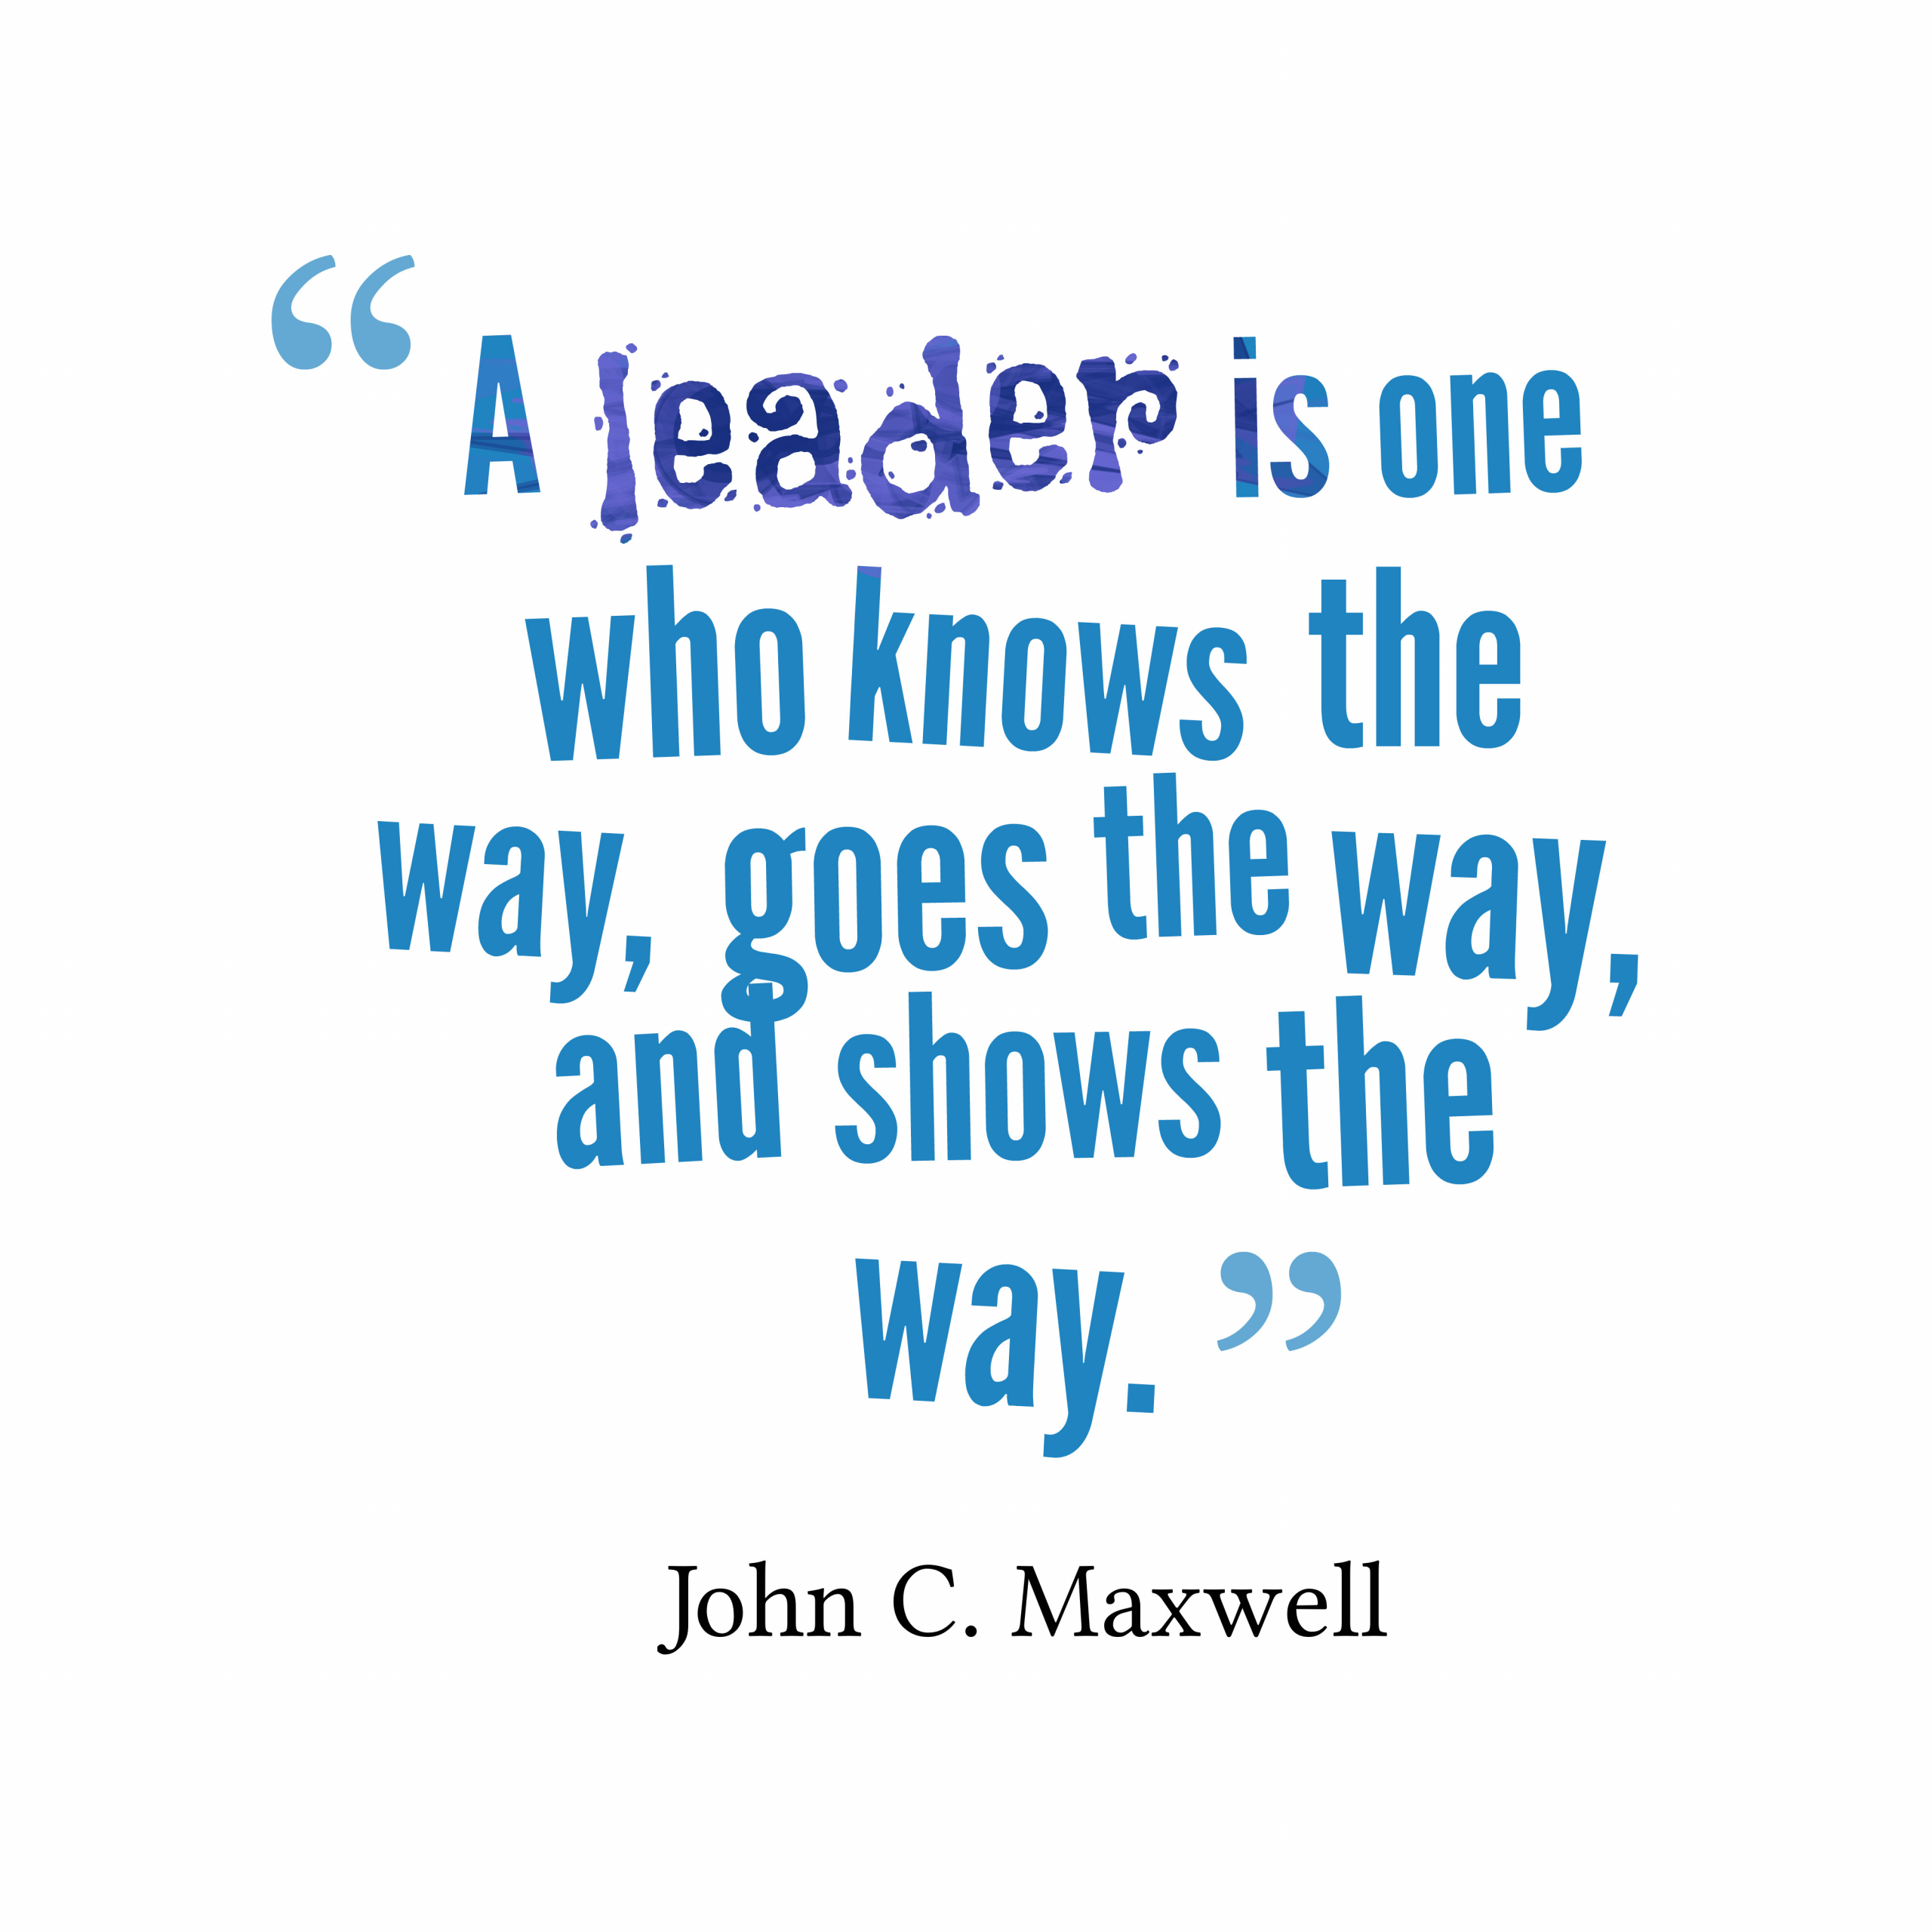 John C Maxwell Leadership Quotes
 Get high resolution using text from John C Maxwell quotes